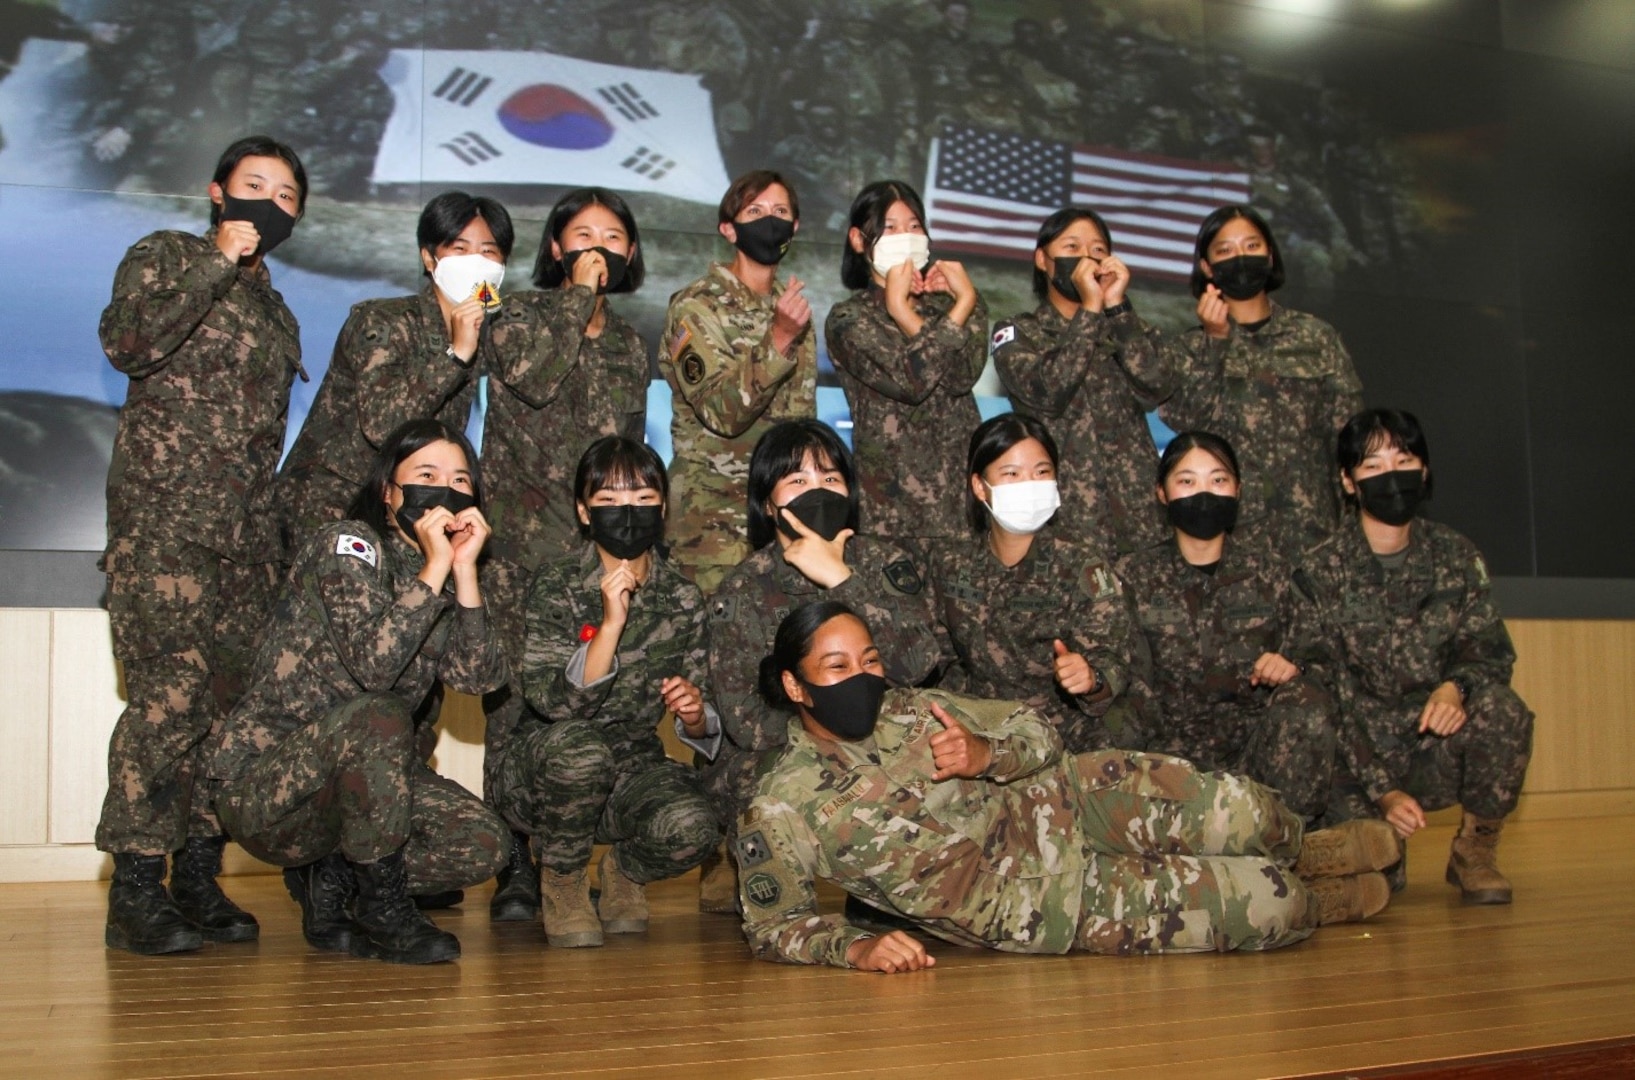 Group photo of 2 U.S. and 10 Korea female soldiers on stage posing for a photo.